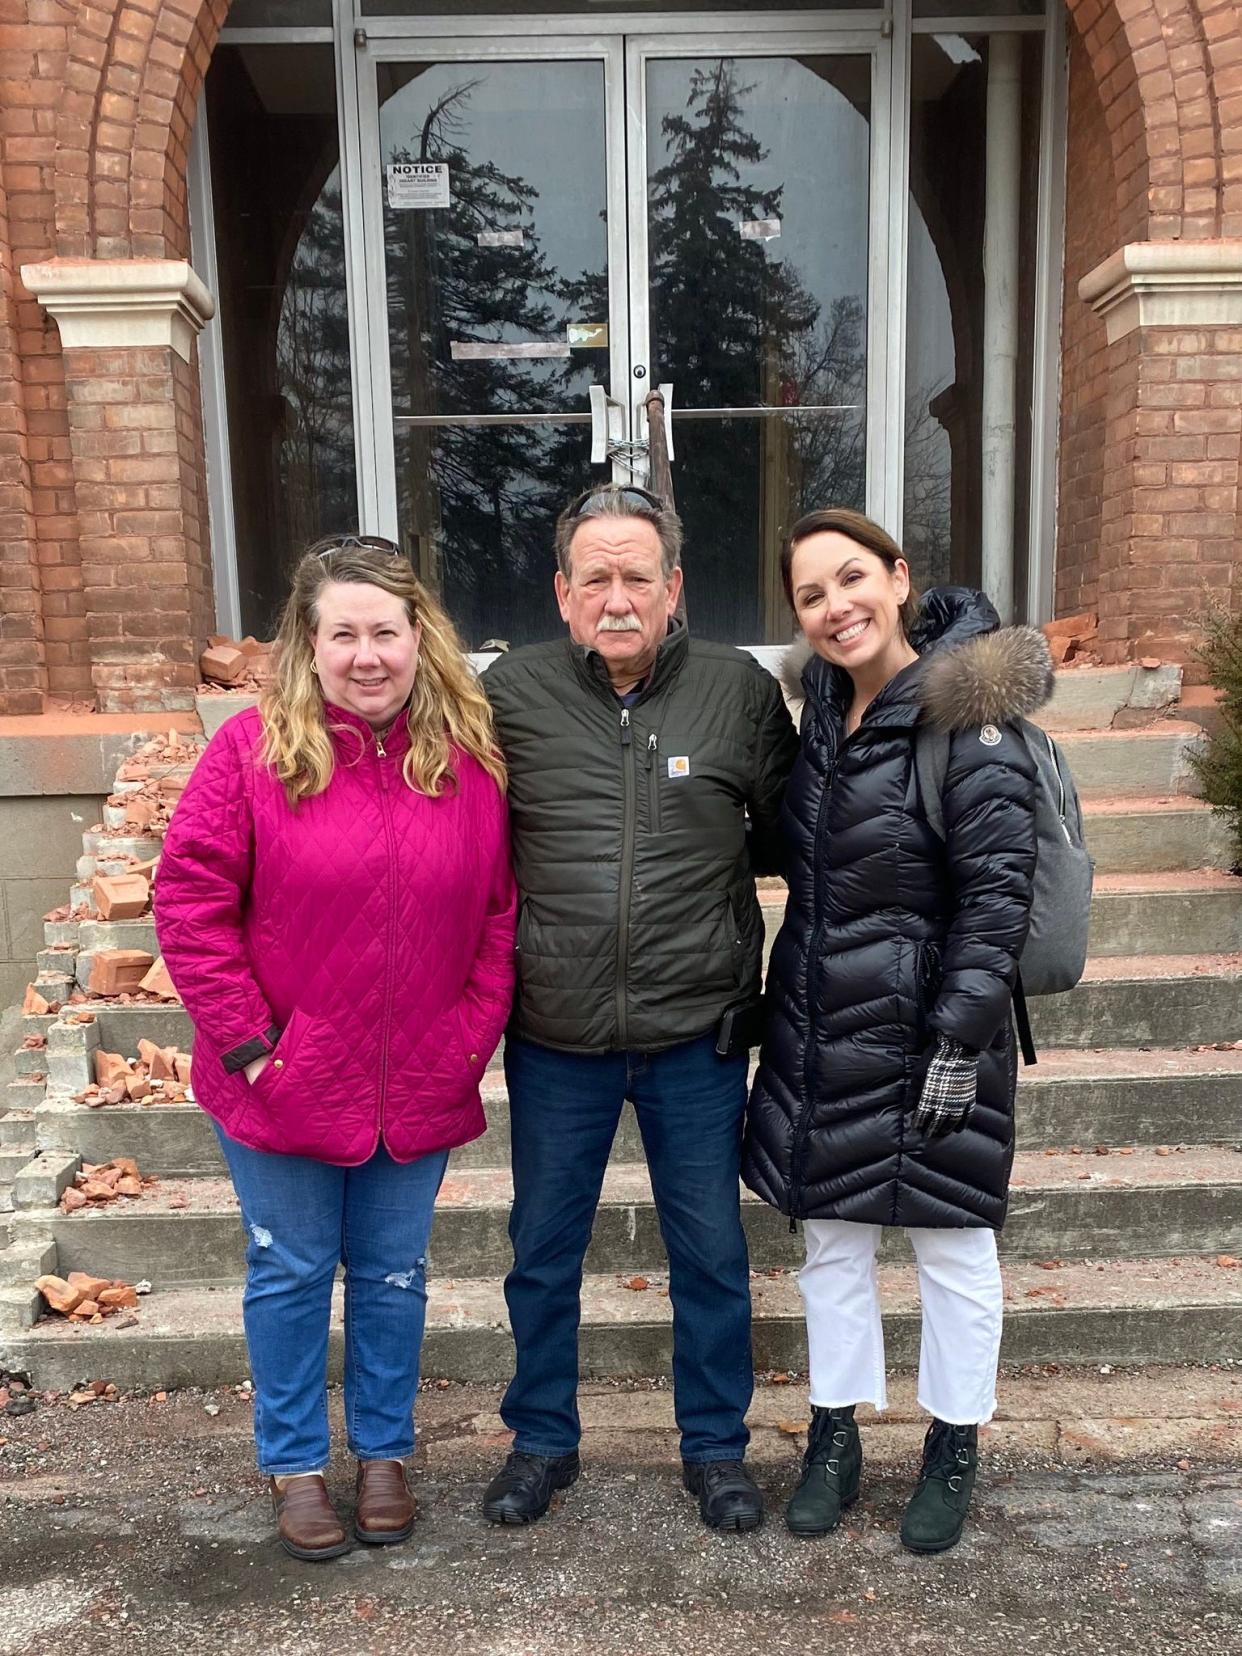 Leslie Harkai (left), curator of historical collections for the Flat Rock Historical Society; Bruce Chapin, president of the historical society; and Jennifer Schoenberger, owner of a design firm in Georgia who grew up in Flat Rock, are pictured in front of the Reading Building.